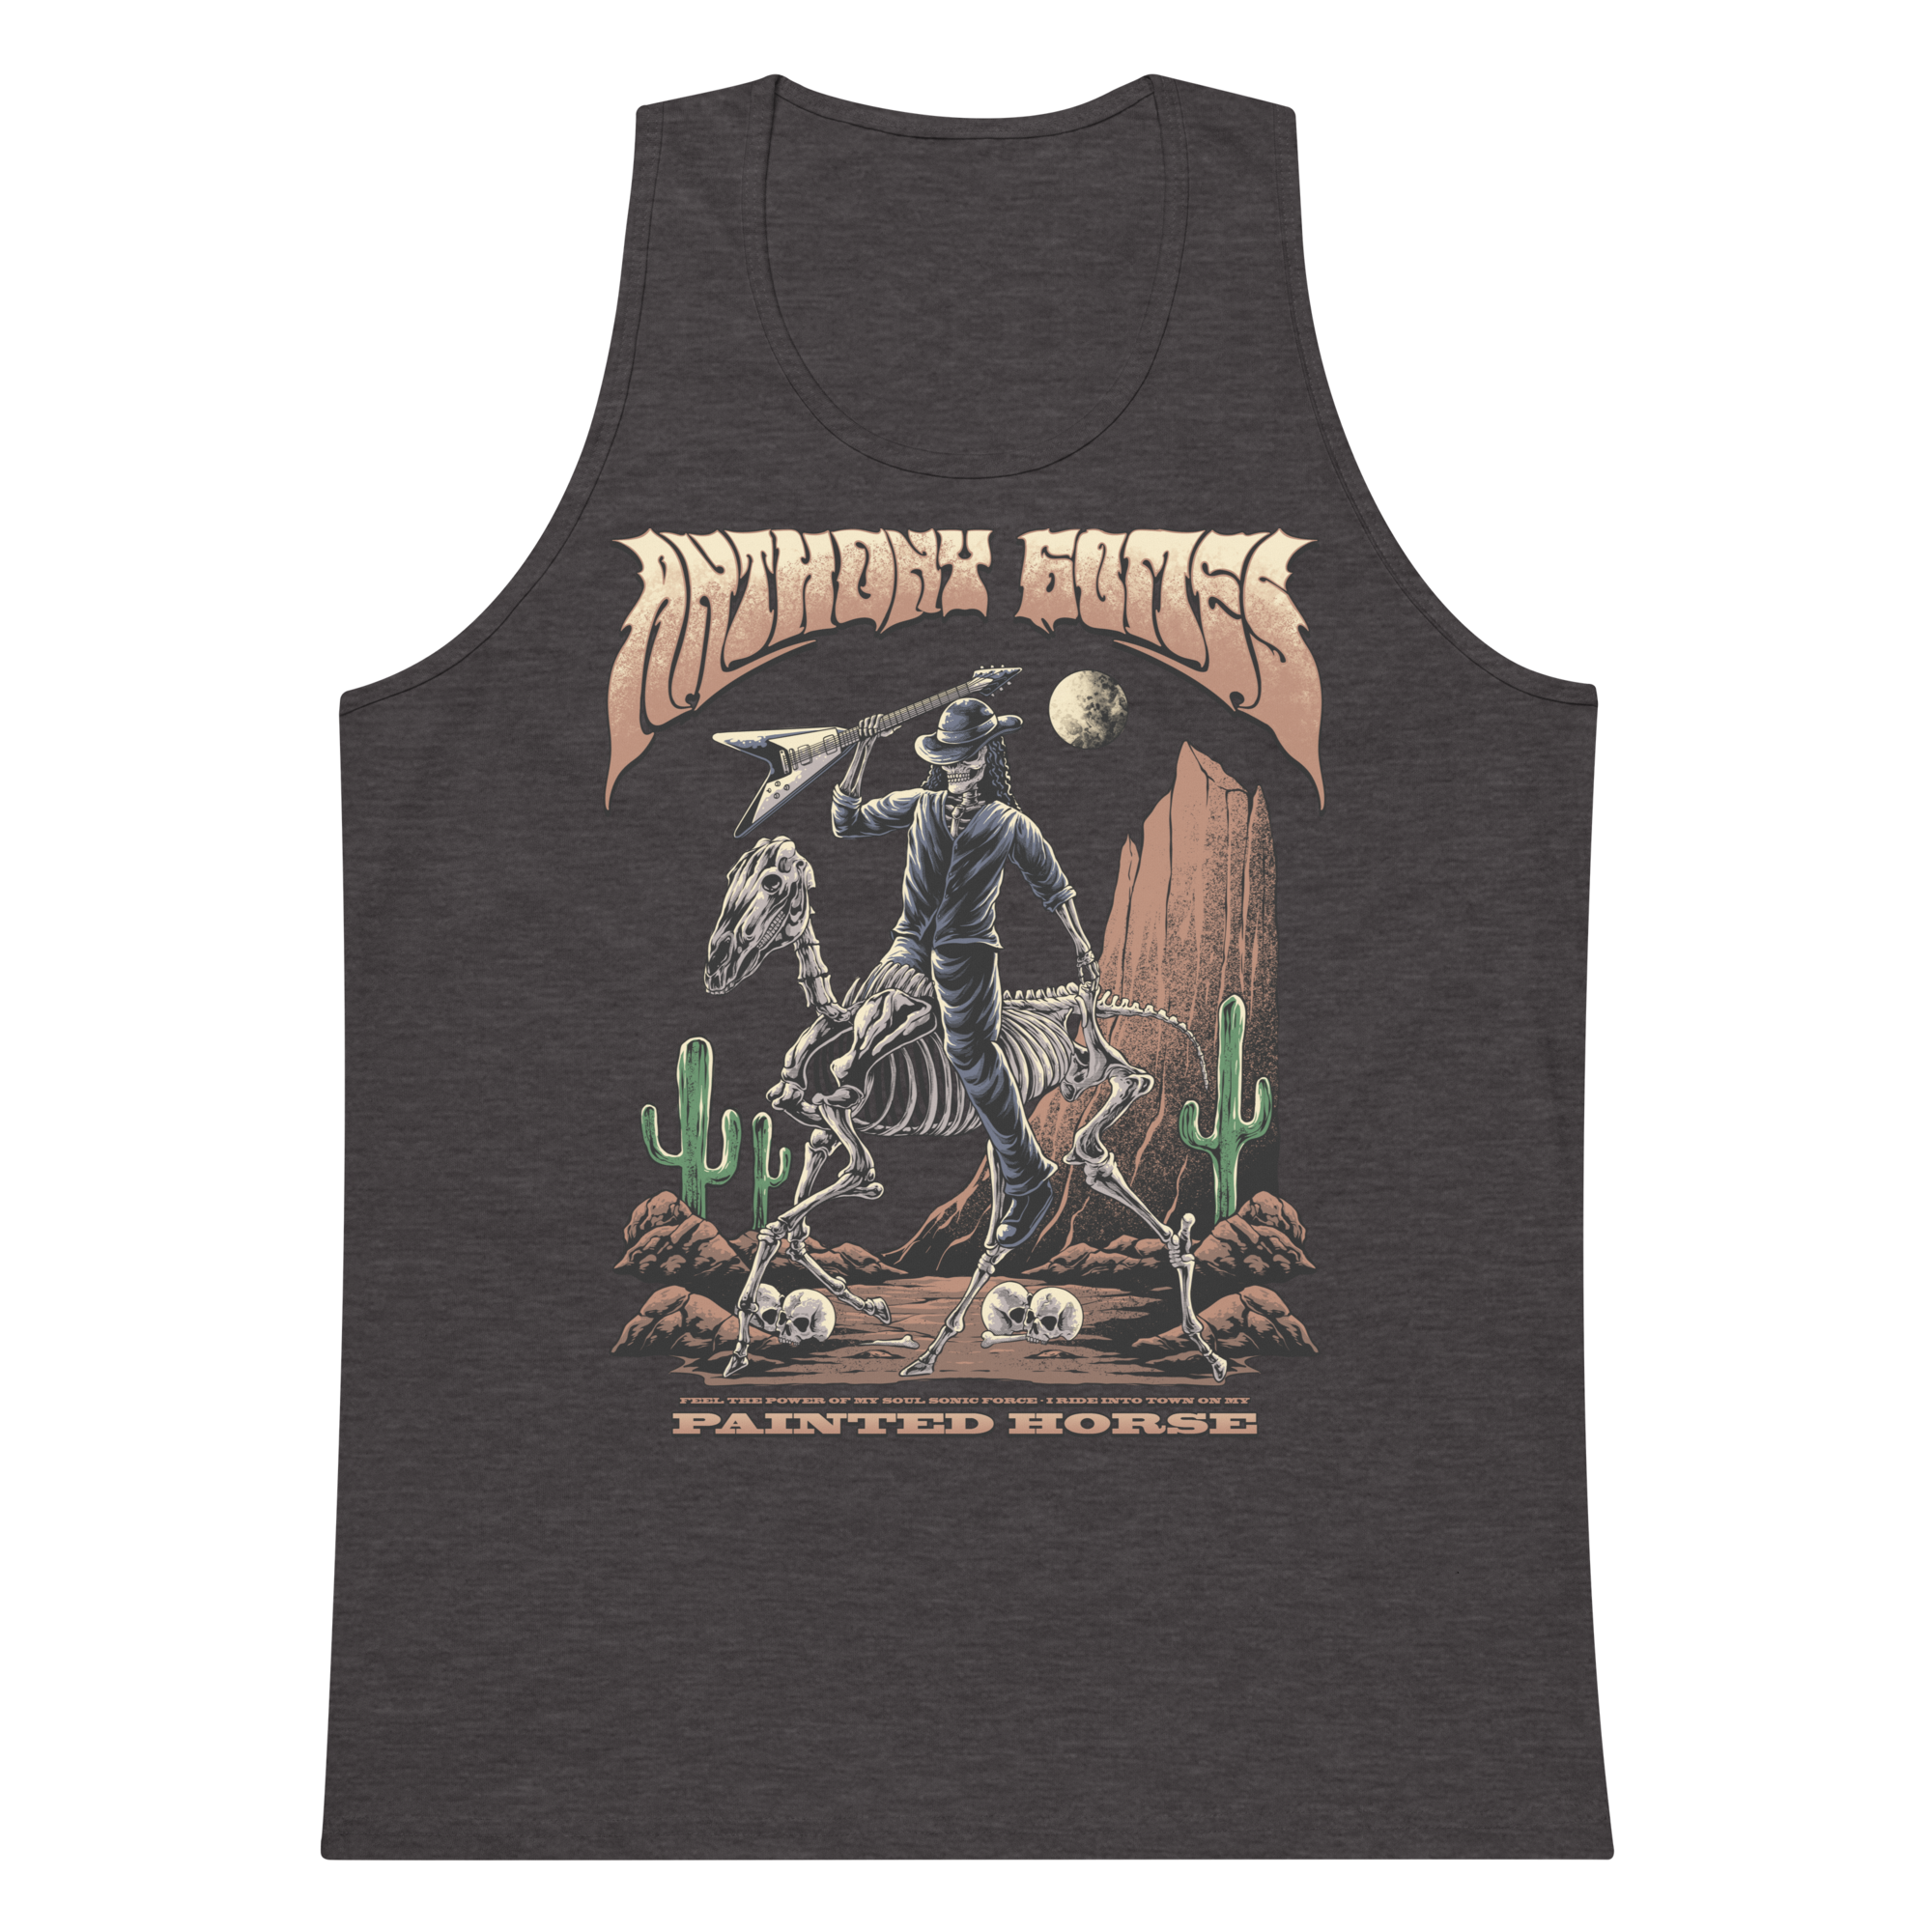 Men’s Painted Horse Tank Top - Available in 7 Colors (S-3XL)